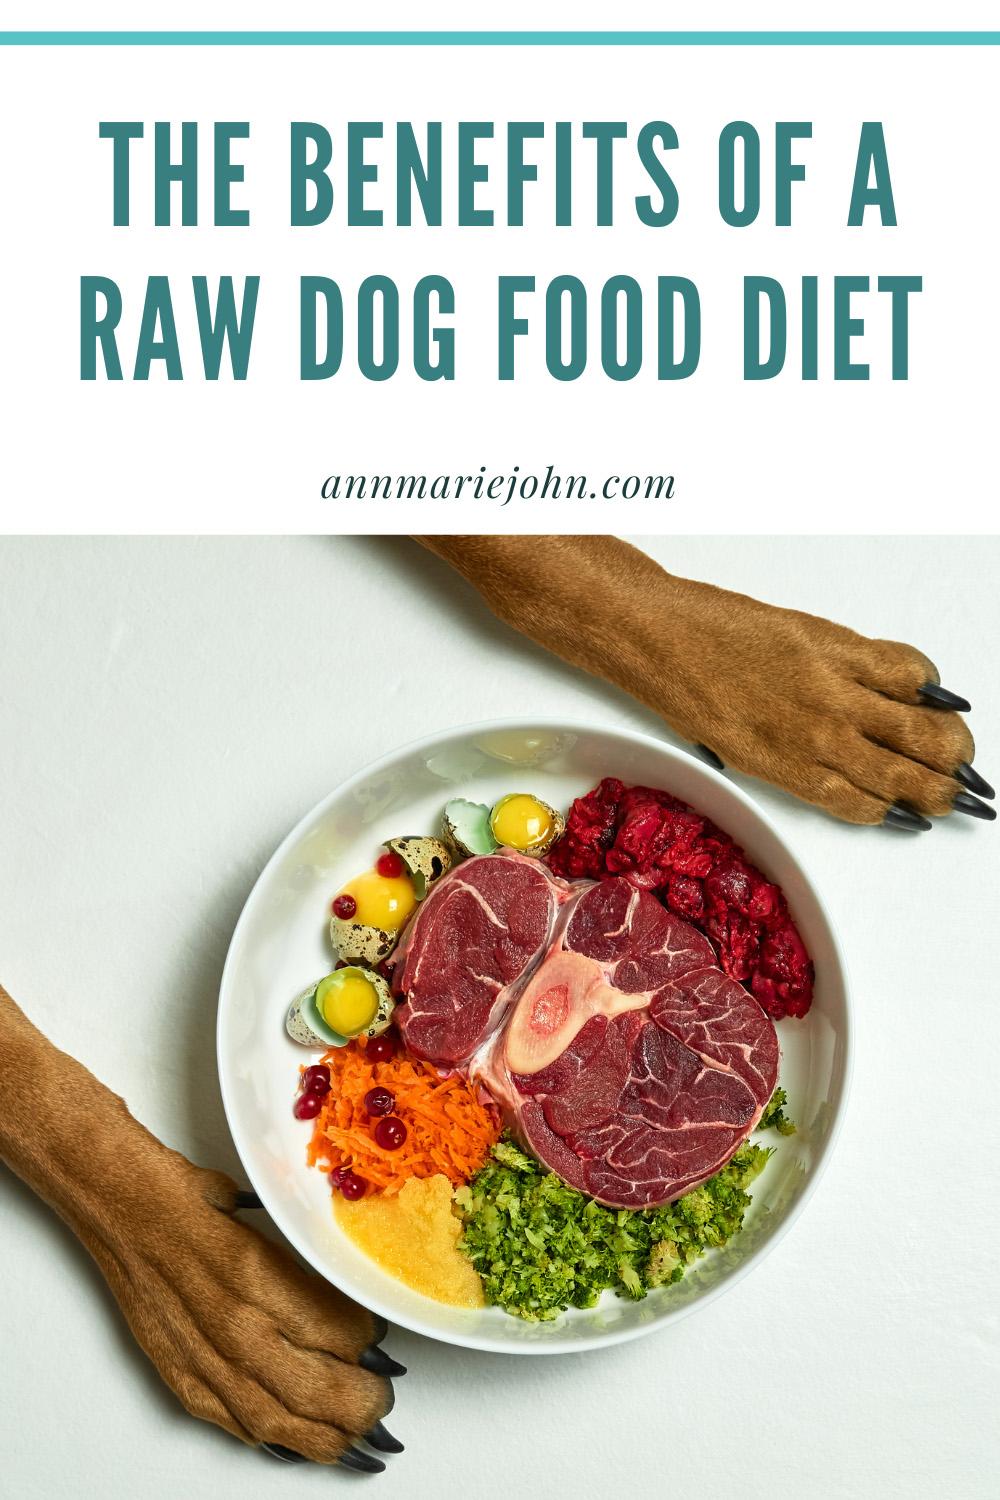 The Benefits of a Raw Dog Food Diet